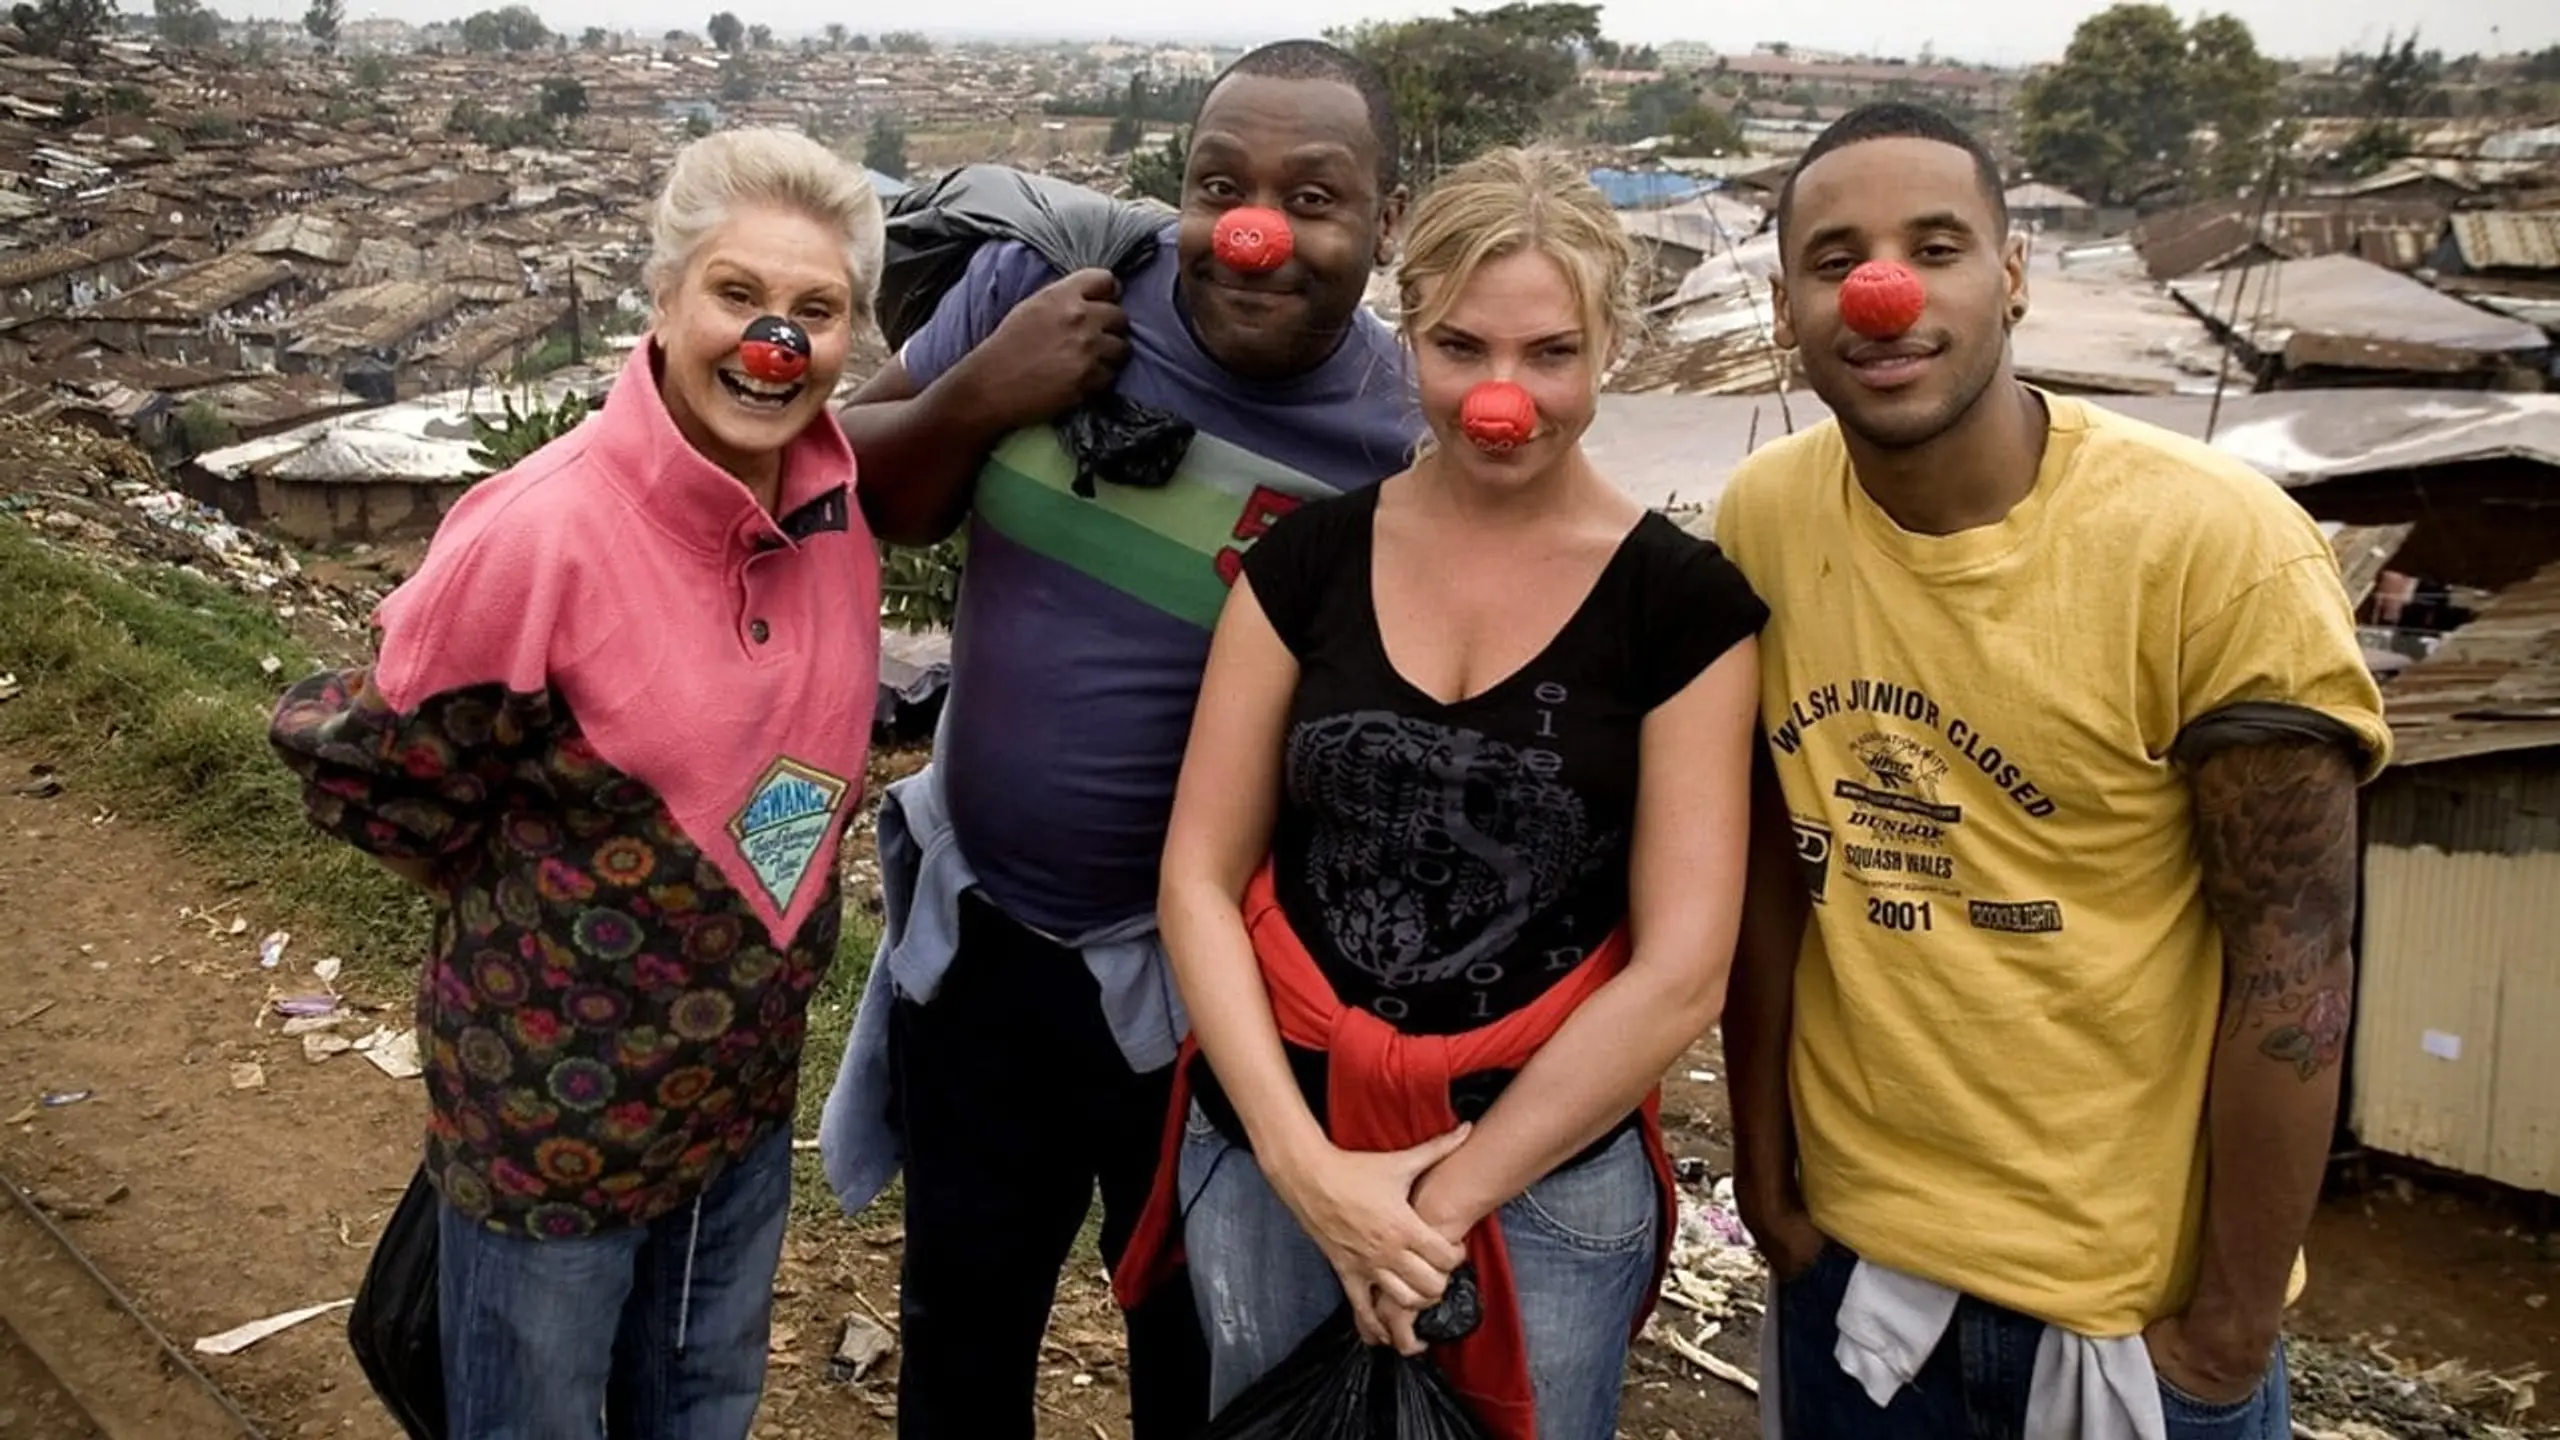 Famous, Rich And In The Slums with Comic Relief